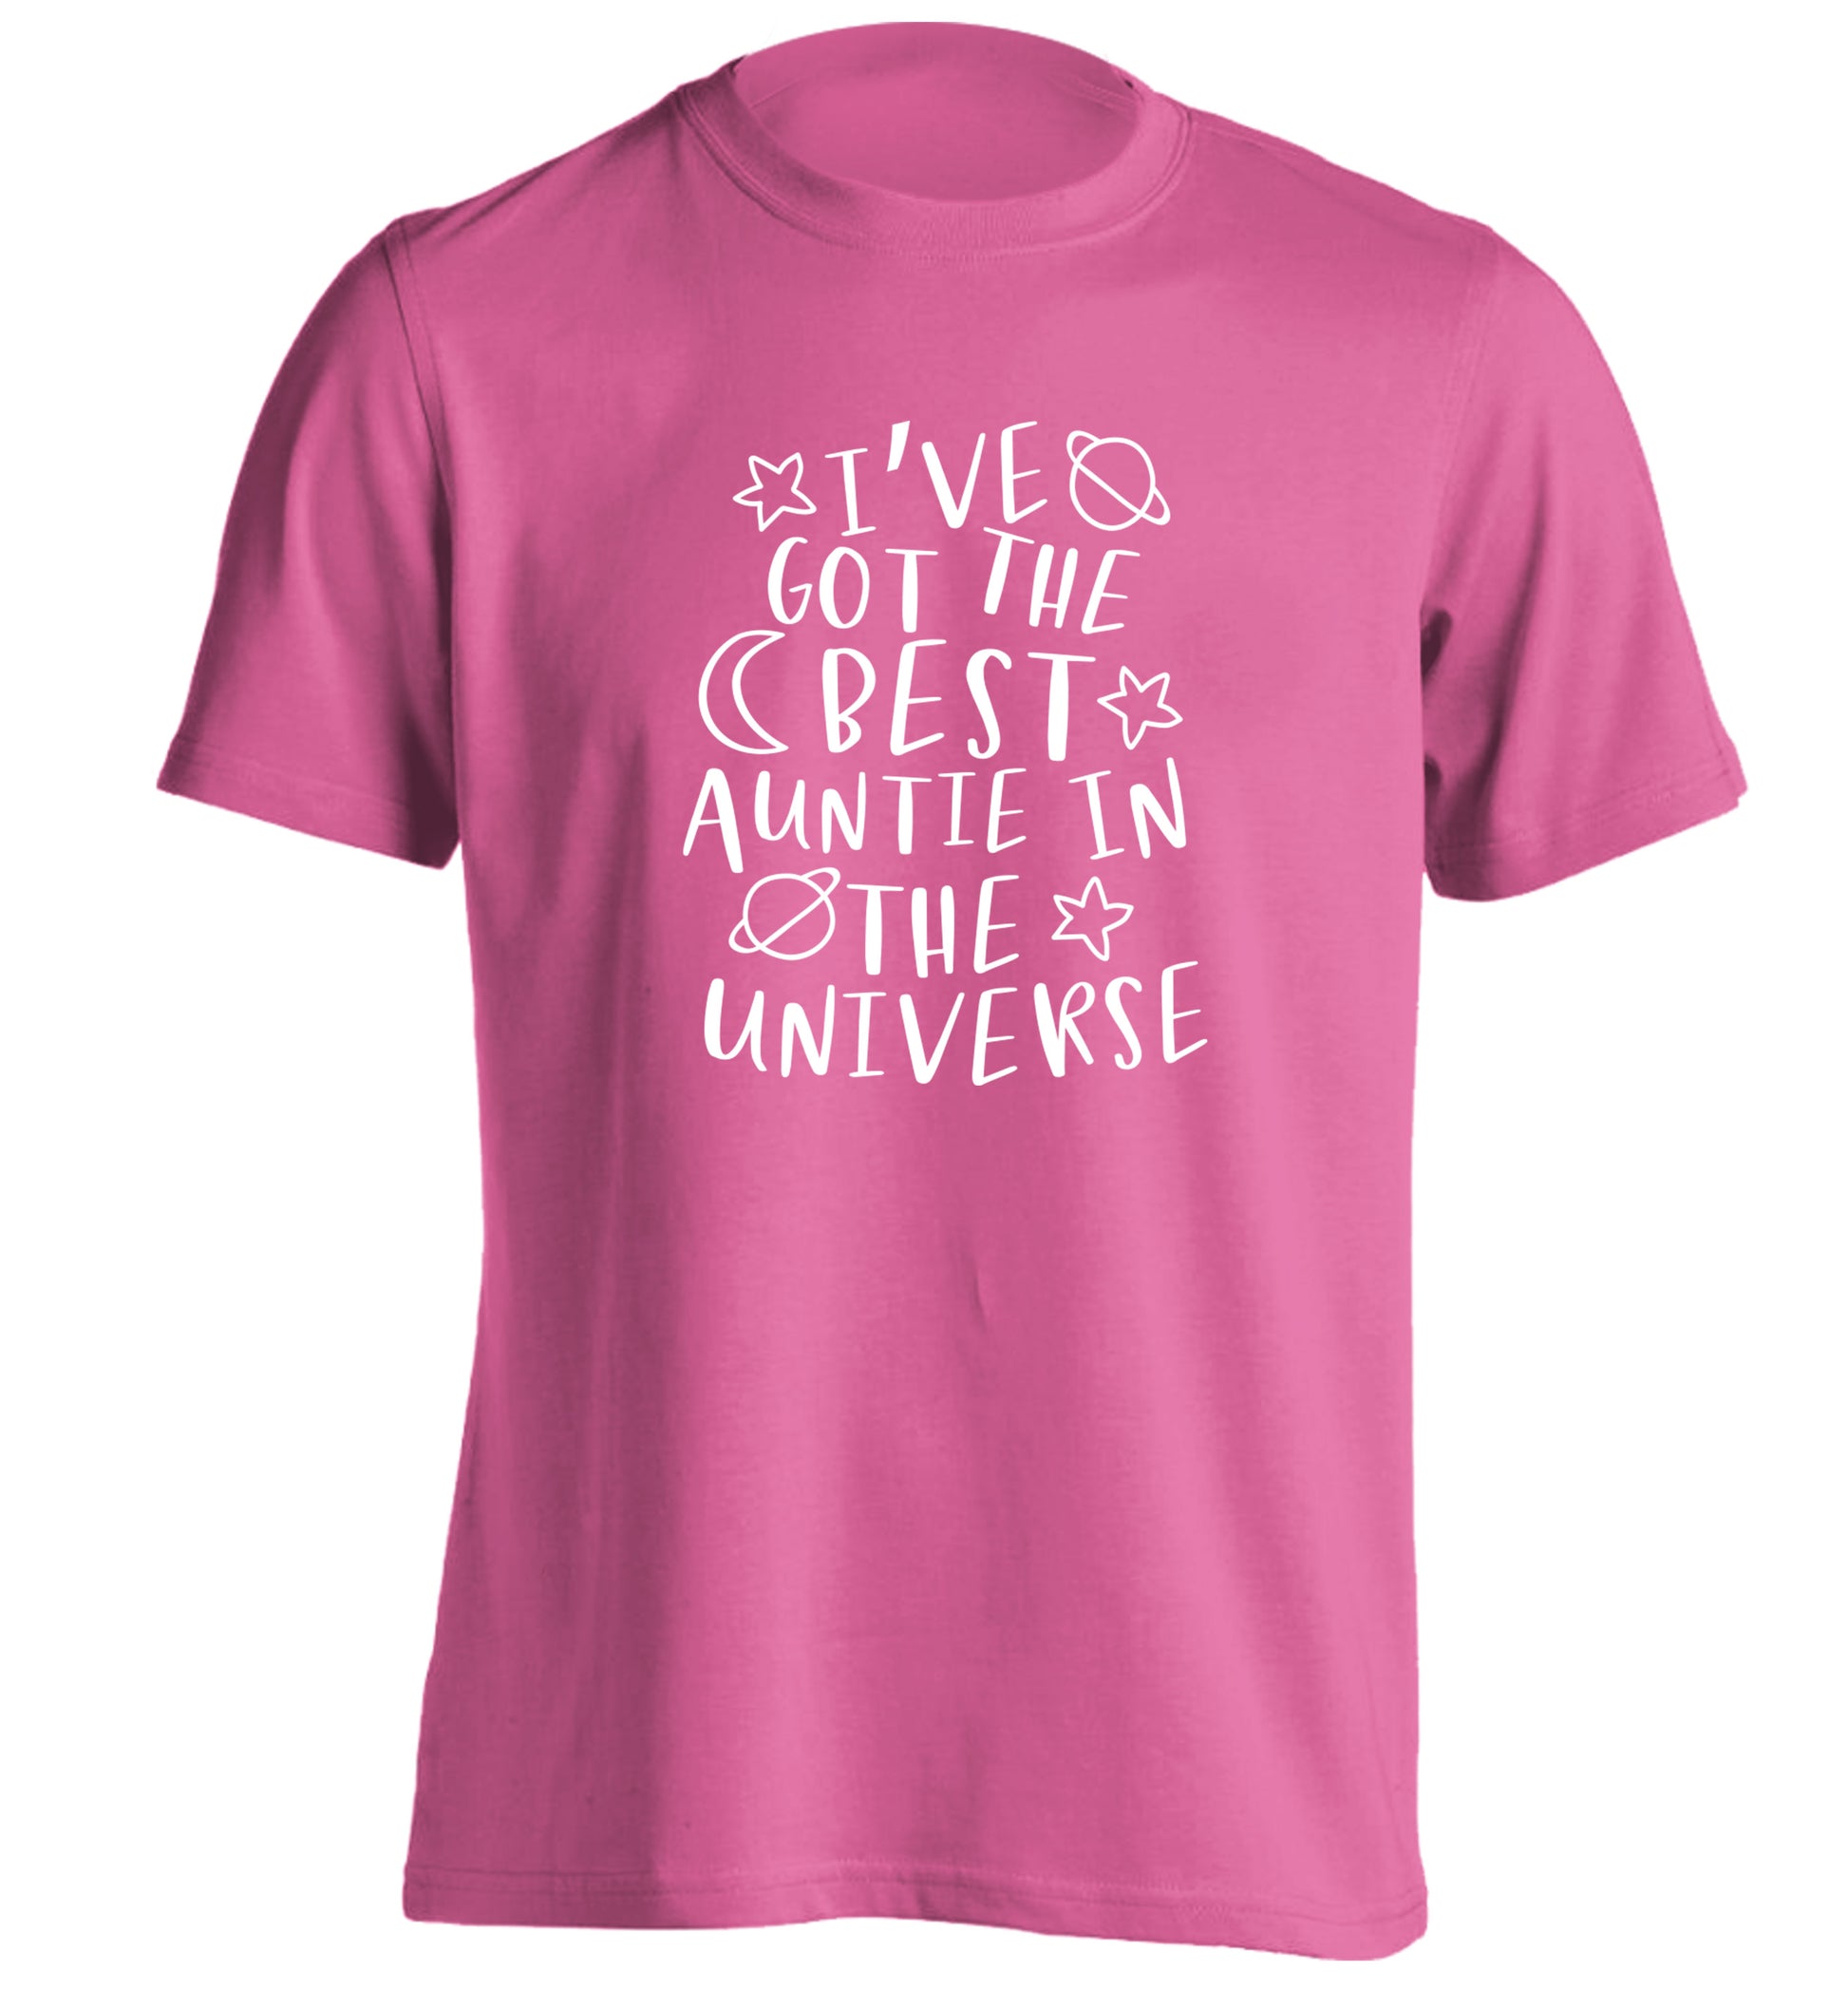 I've got the best auntie in the universe adults unisex pink Tshirt 2XL